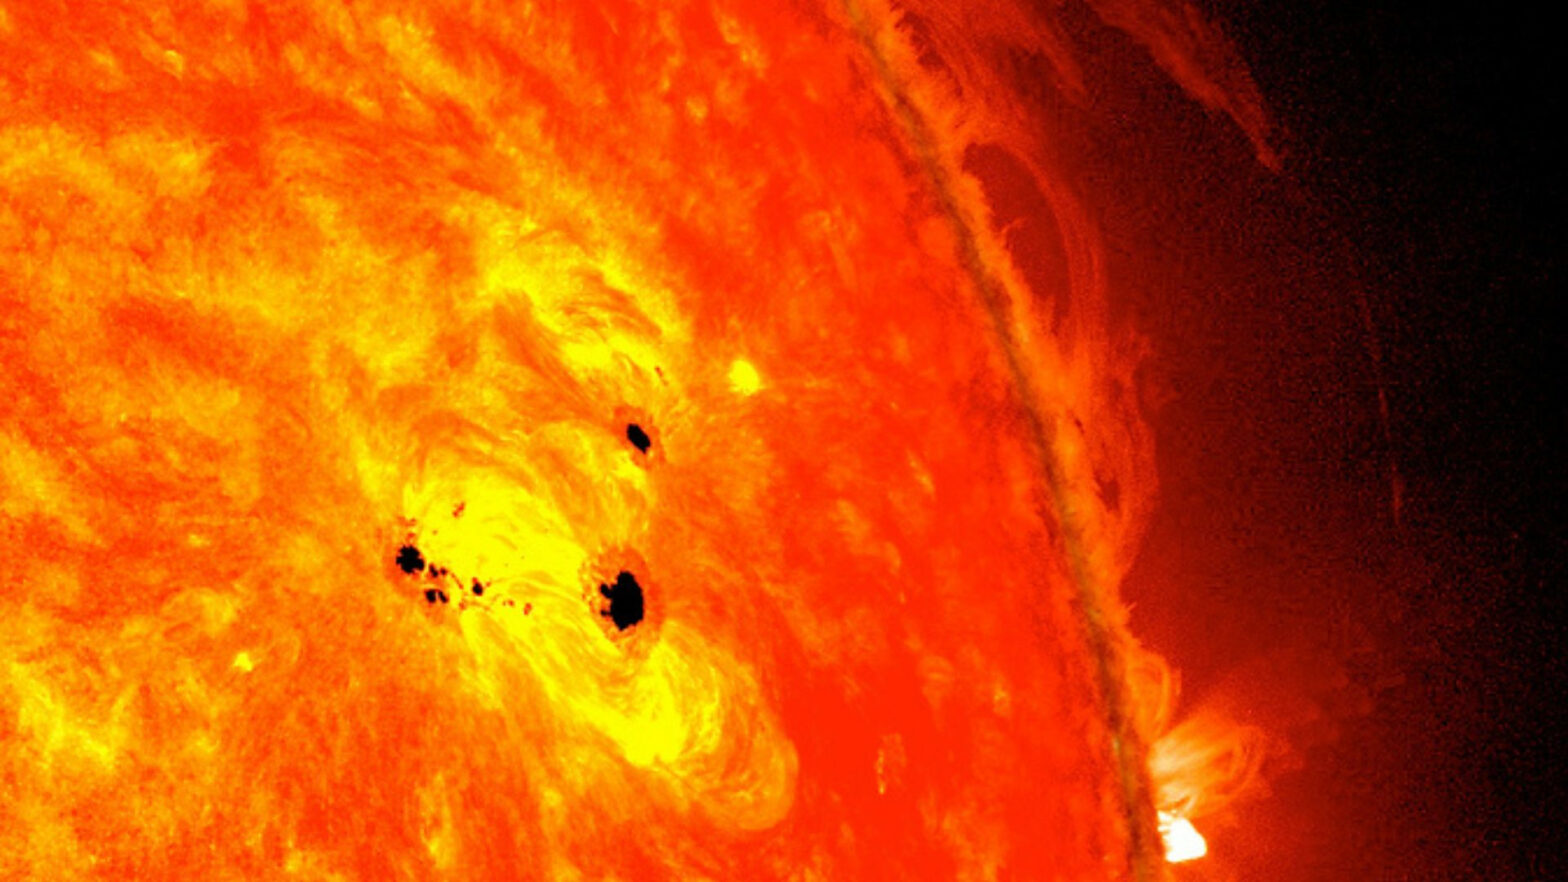 Stunning time-lapse photo of Sun shows sunspots at their peak